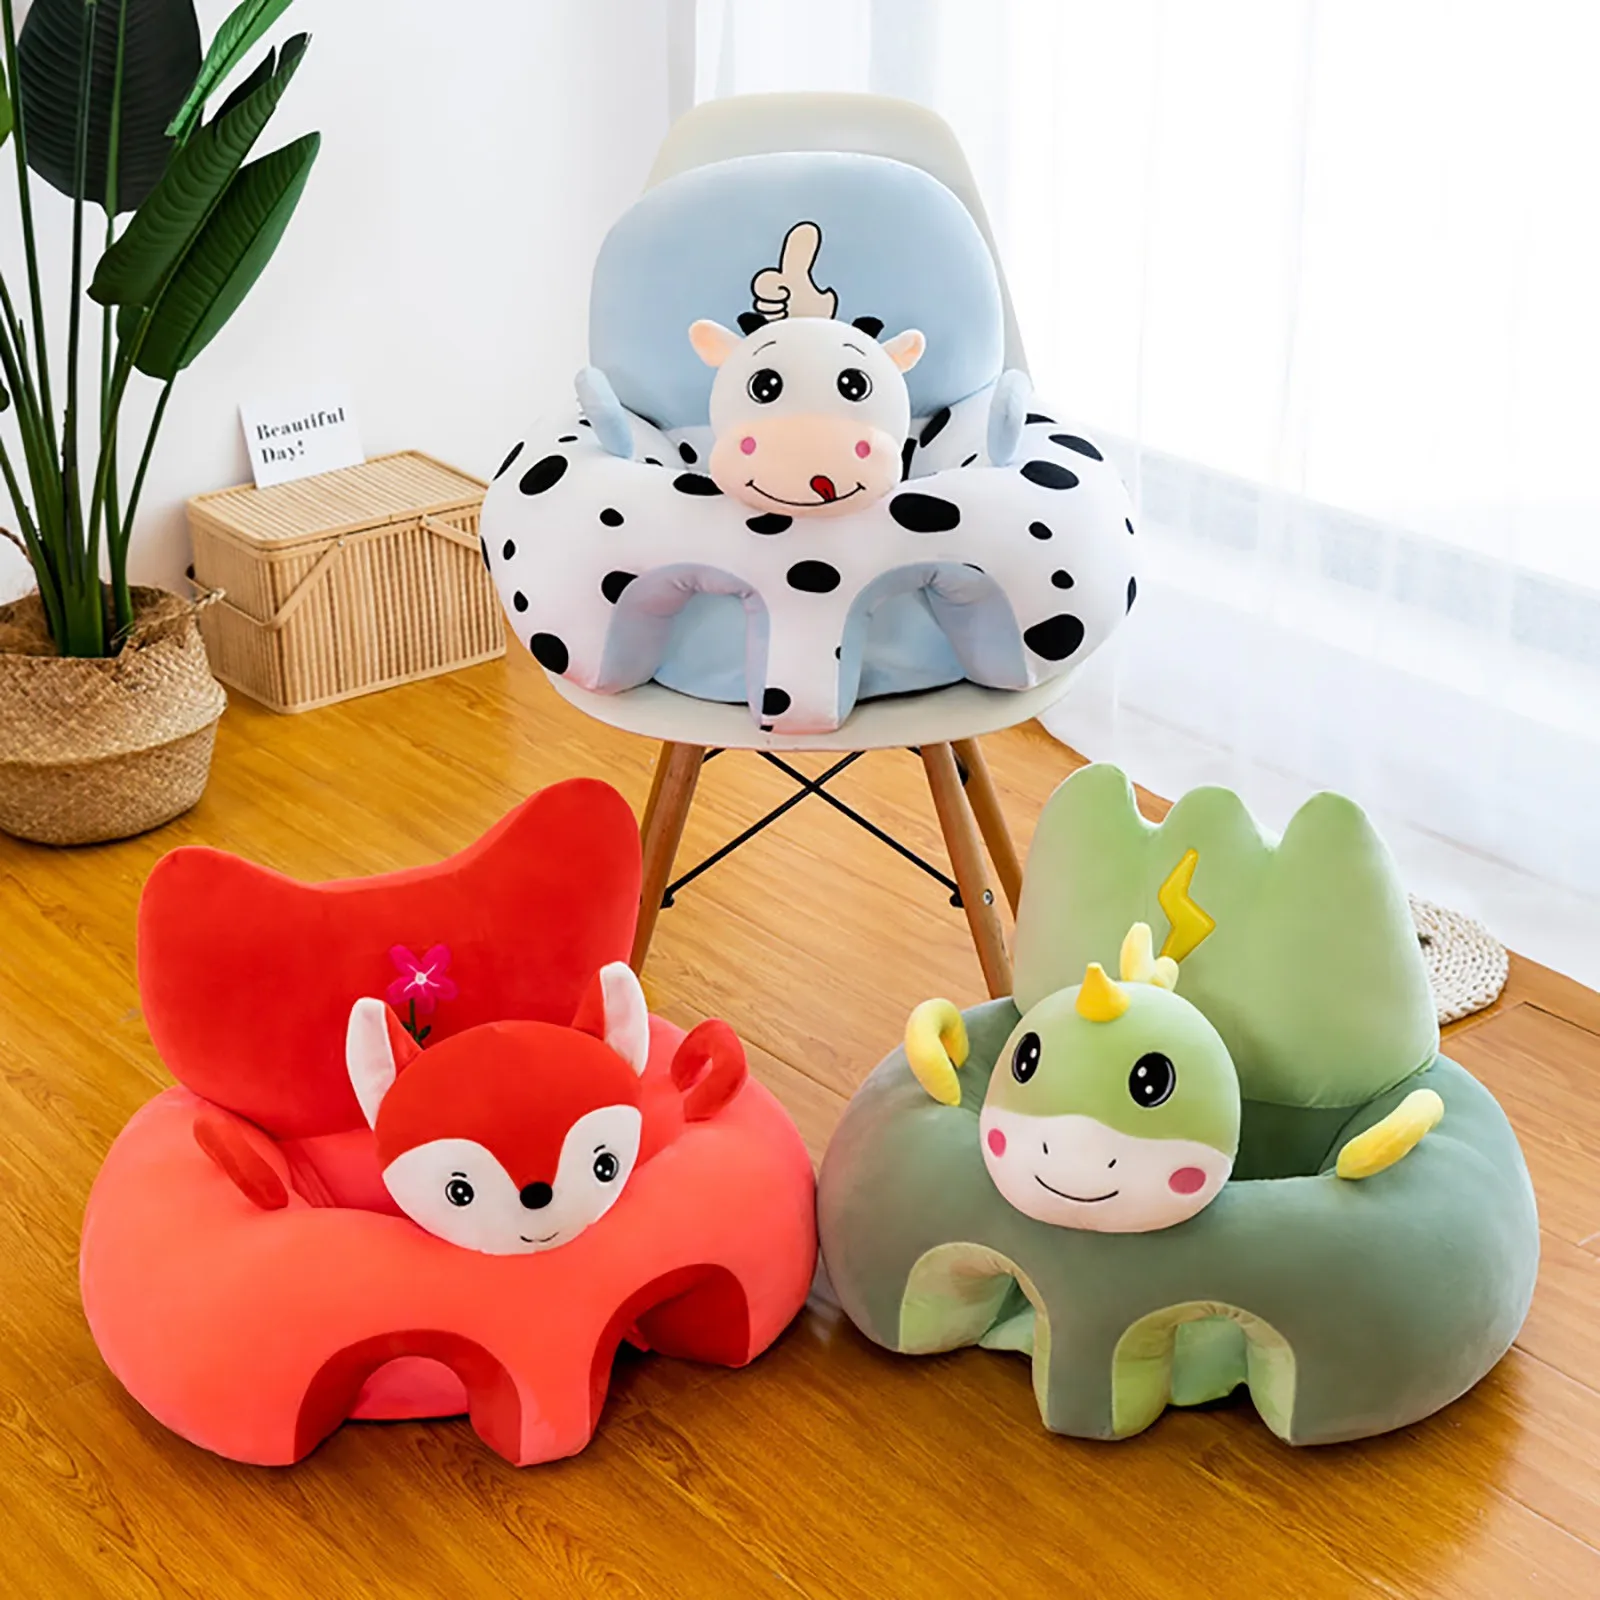 2022 New Style Children Chair Animal Shape Sofa Cartoon Plush Toy Learning Seat Learning Baby Portable Filled With Cotton hot sale baby small sofa seat plush toy mini cartoon lazy tatami child gift infant cartoon seat kids chair